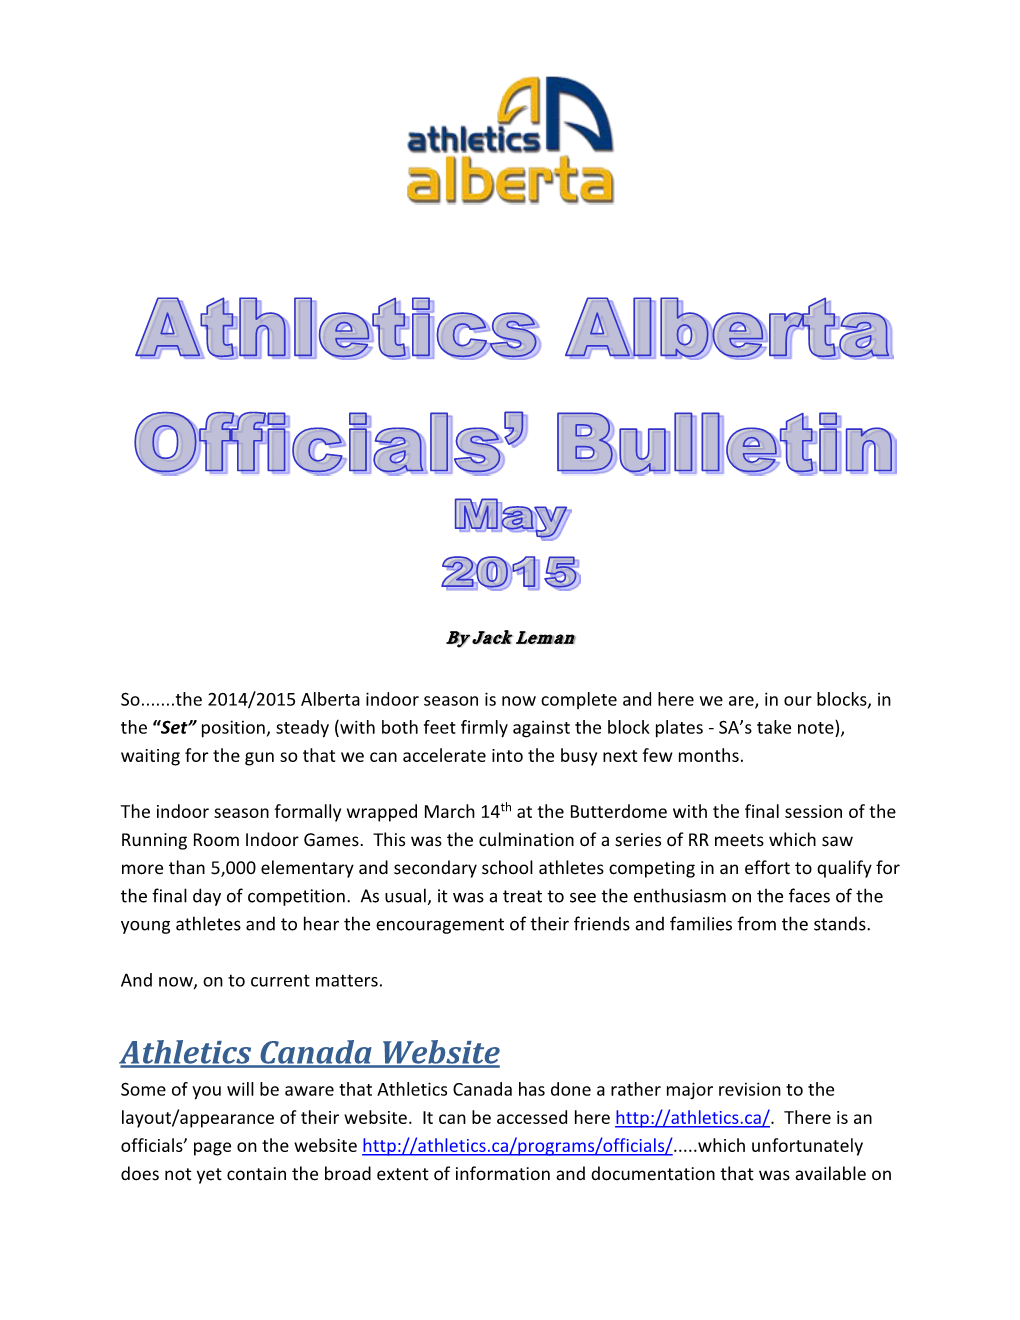 Athletics Canada Website Some of You Will Be Aware That Athletics Canada Has Done a Rather Major Revision to the Layout/Appearance of Their Website